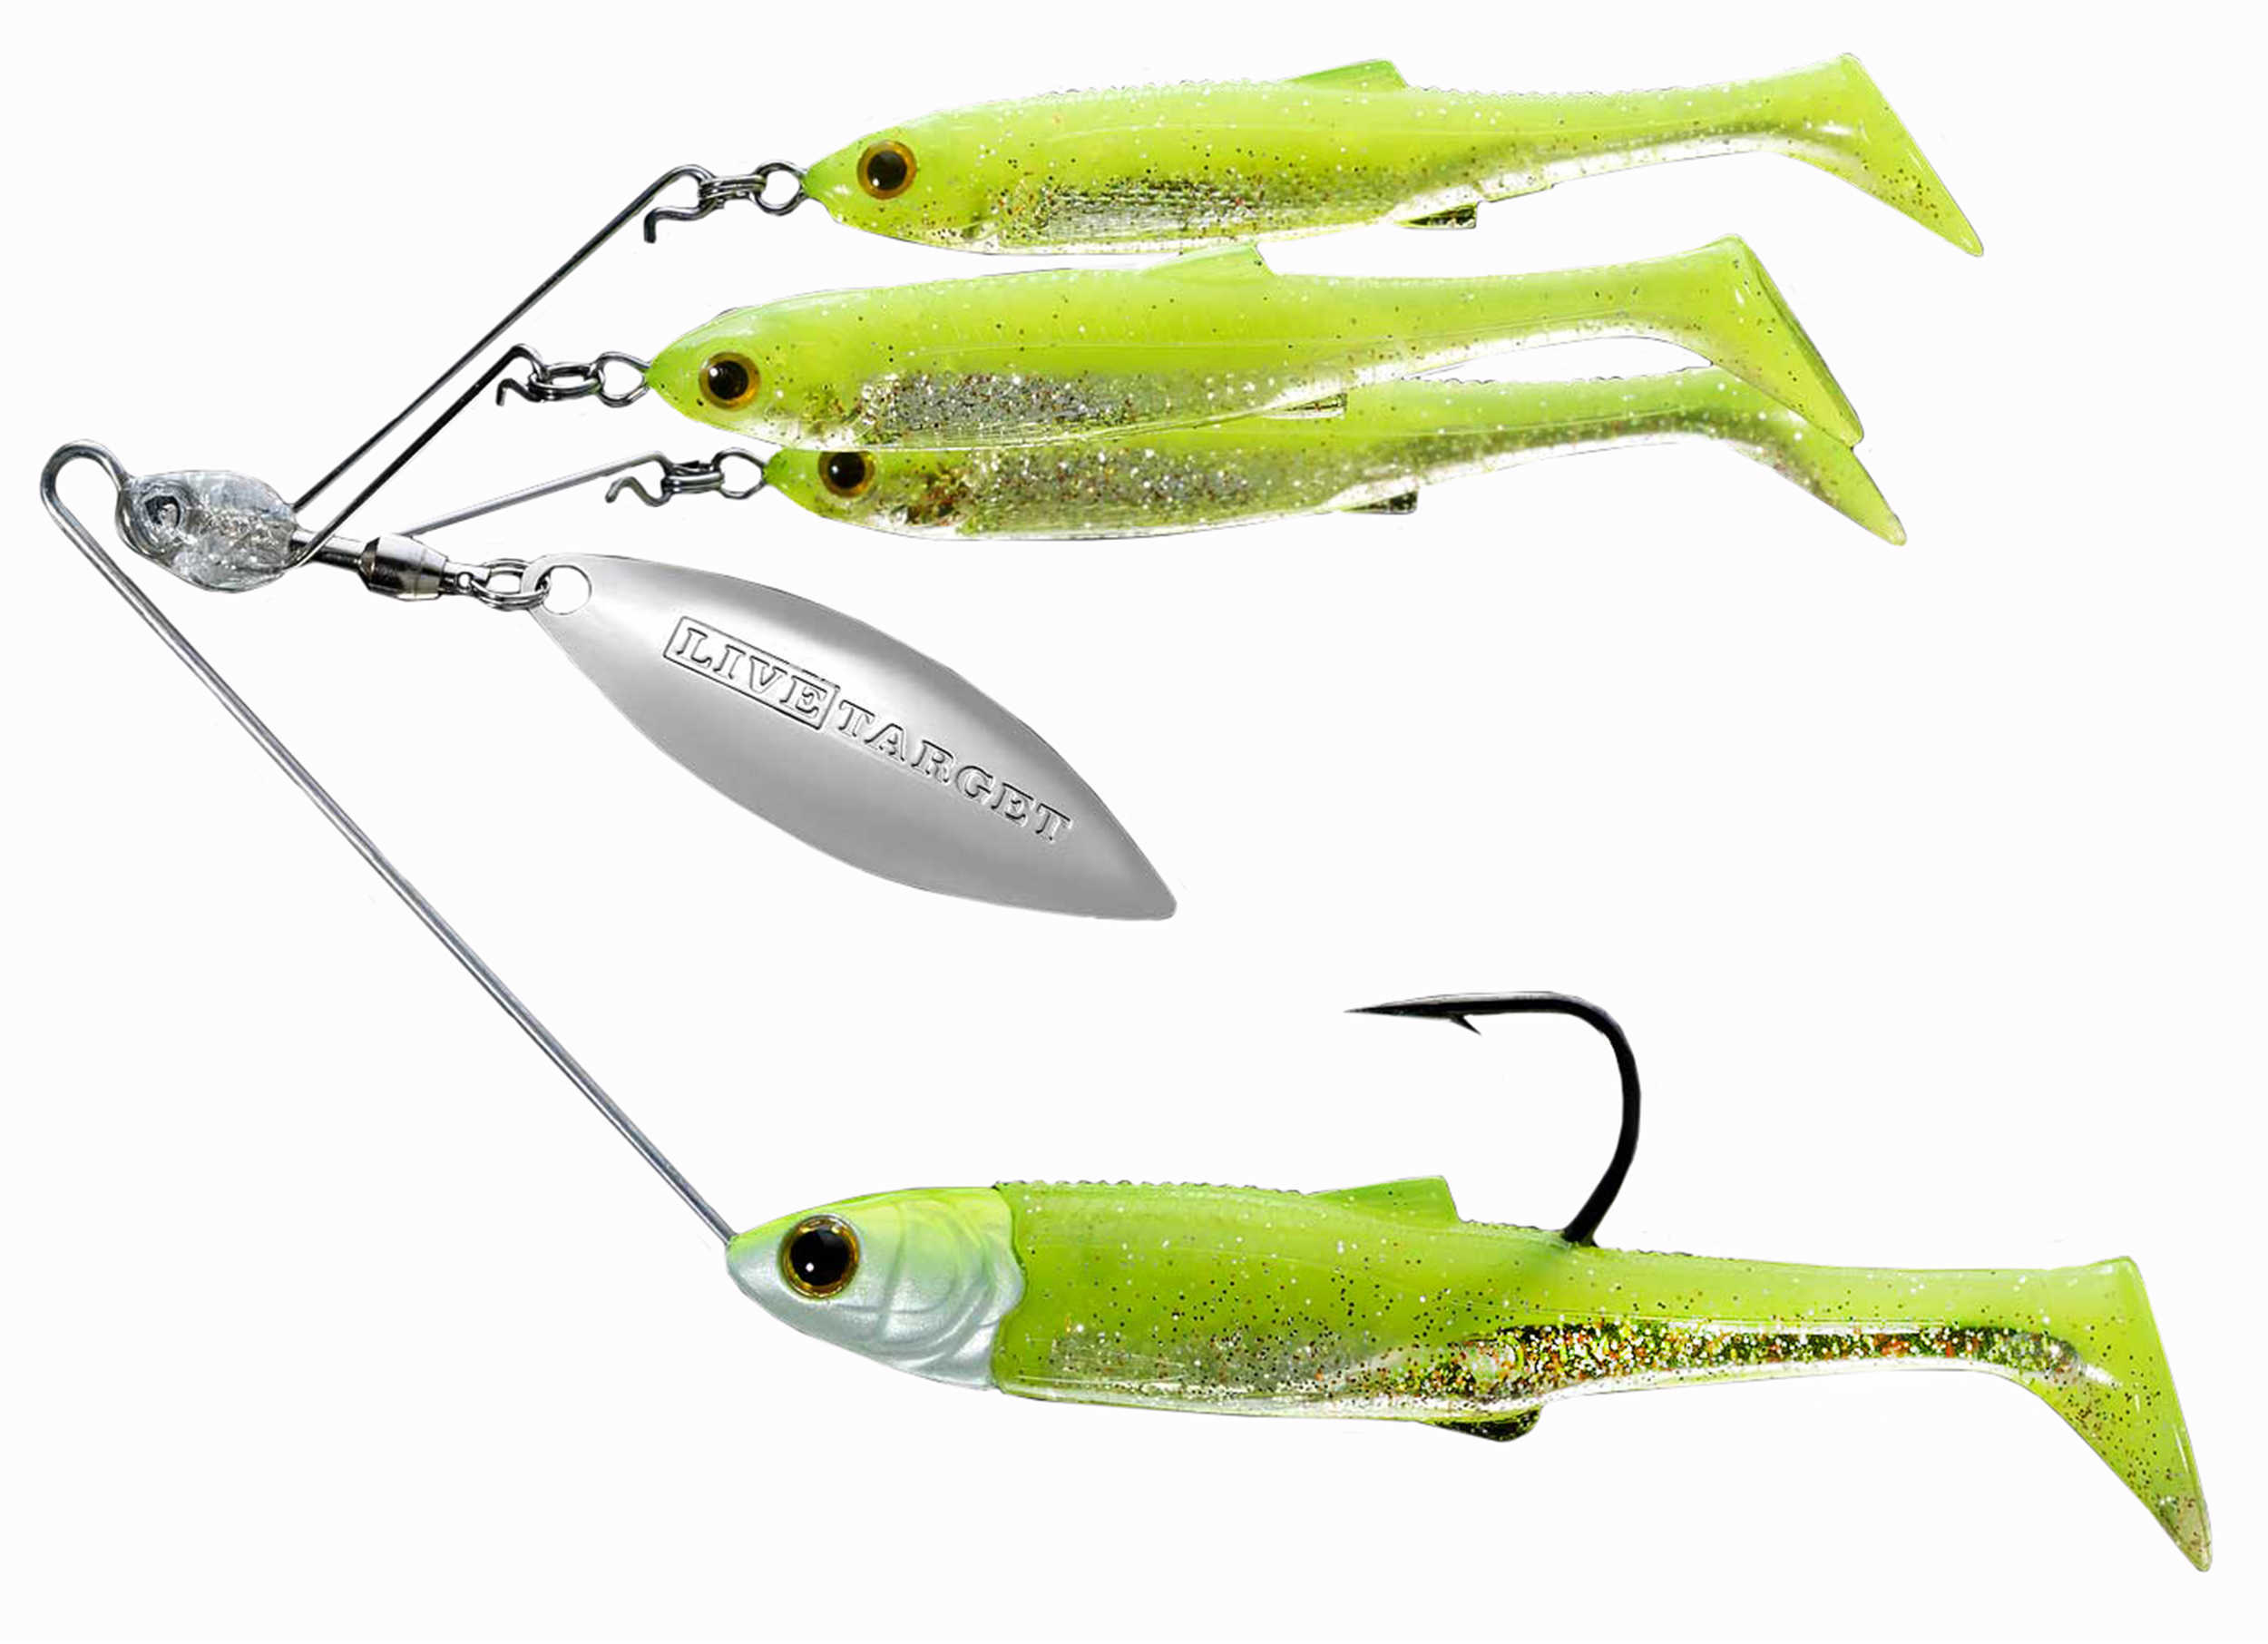 LiveTarget Lures Baitball Spinner Rig Freshwater, Small, 1'-15' Depth, 3/8 oz Weight, Chartreuse/Silver, Per 1 Md: MNSR1